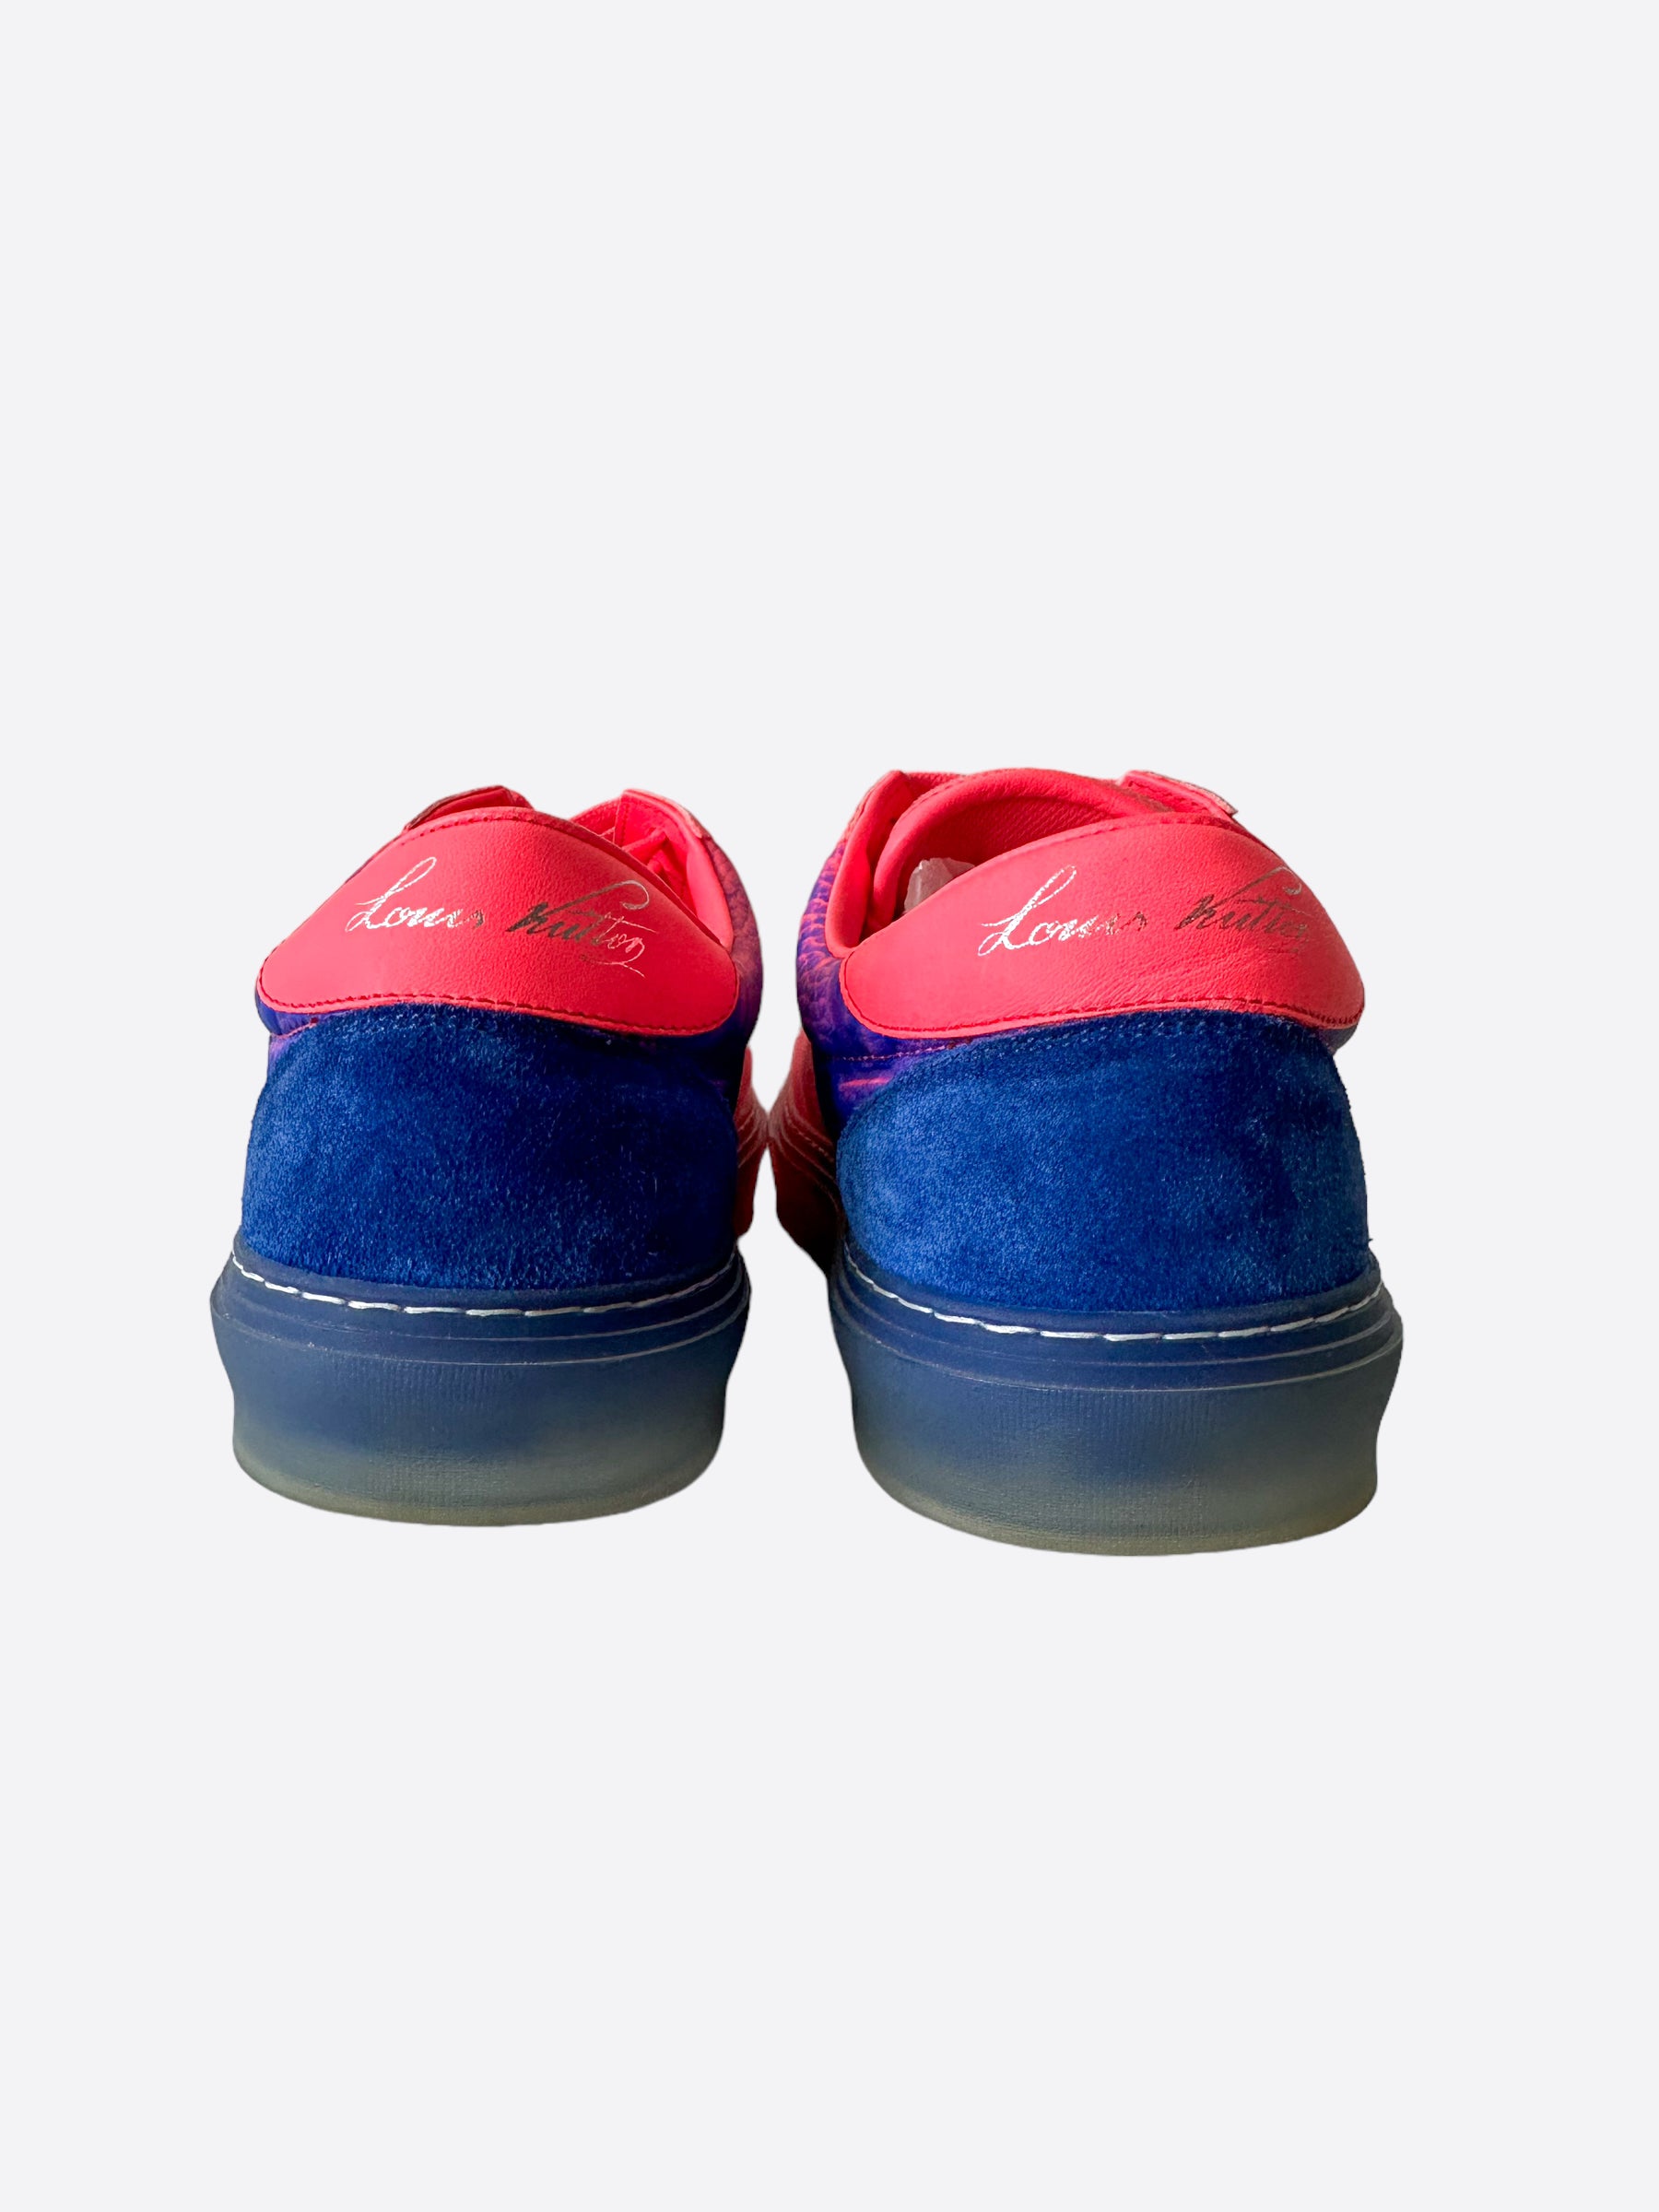 Pre-owned Louis Vuitton Pink Suede Trainers